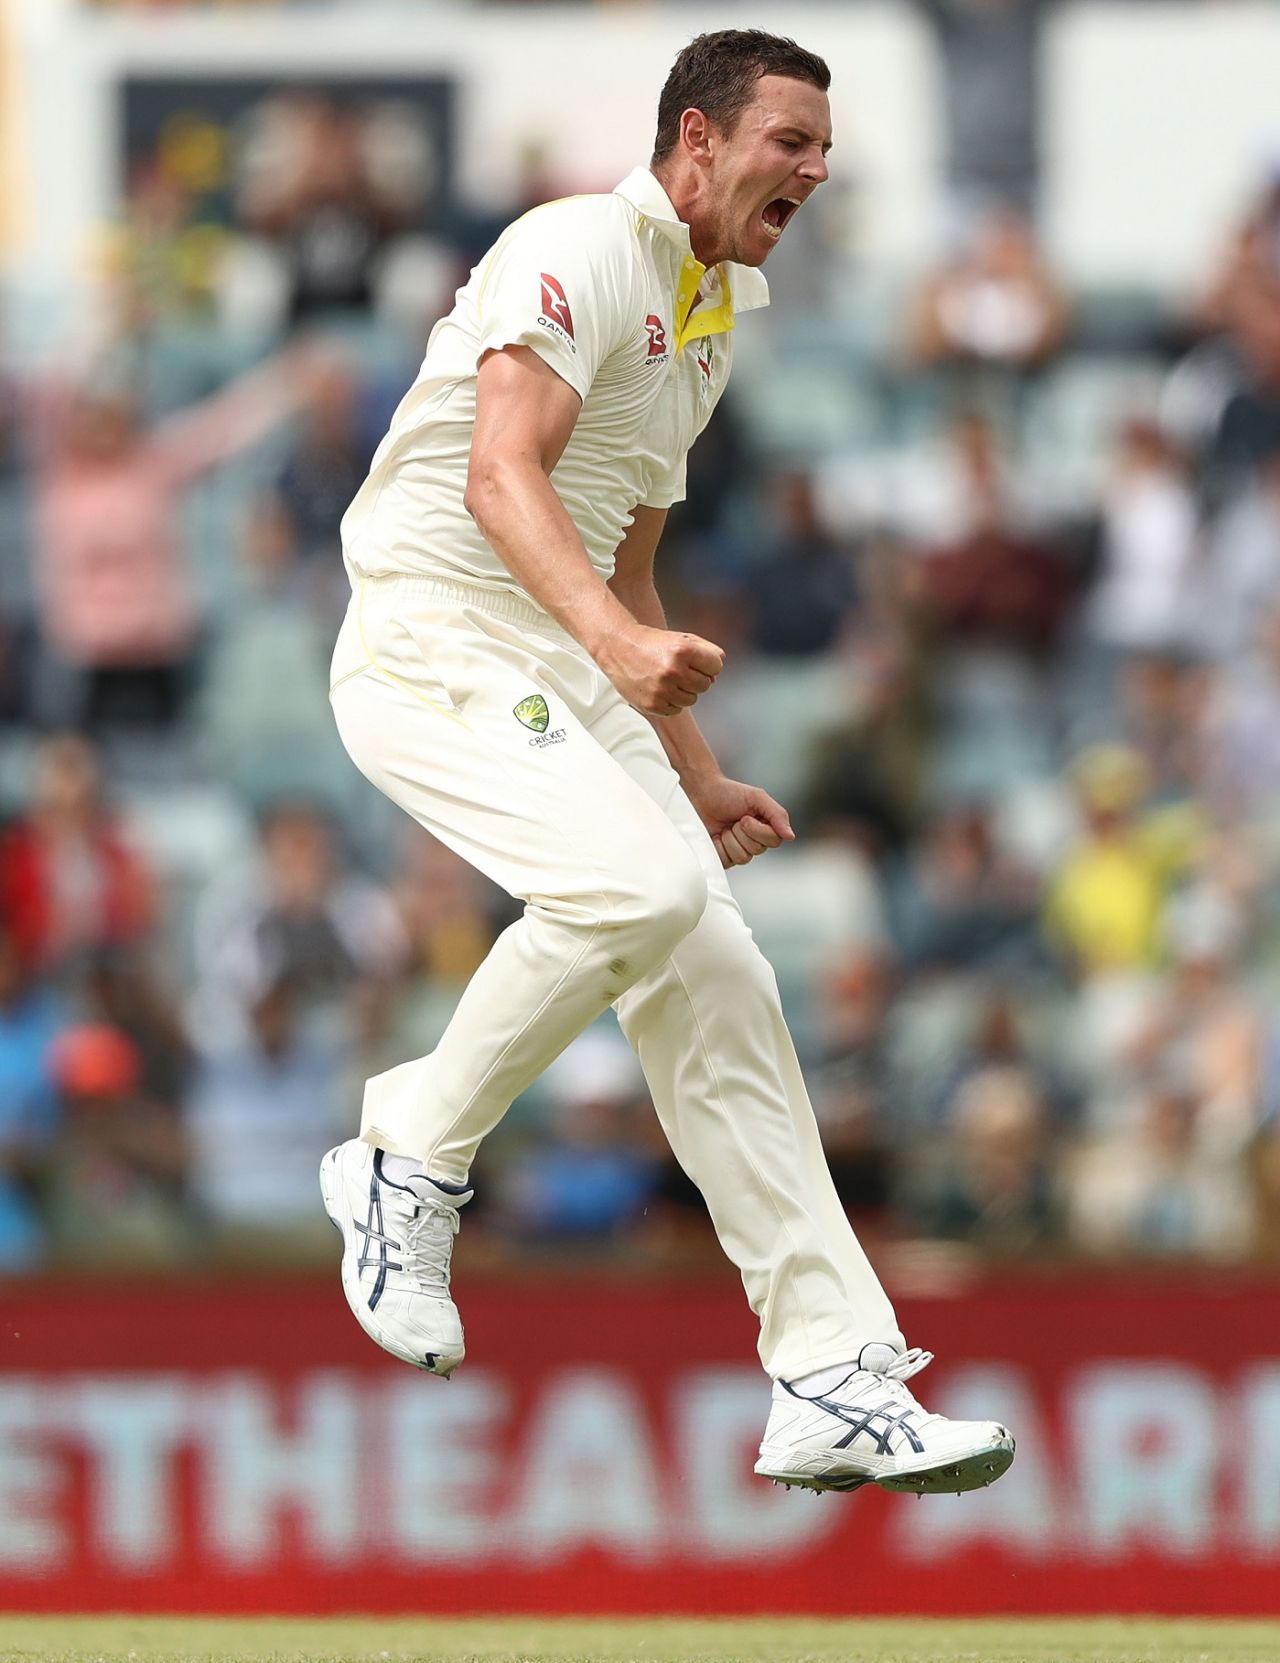 Josh Hazlewood was impeccable with his control, Australia v England, 3rd Test, Perth, 5th day, December 18, 2017